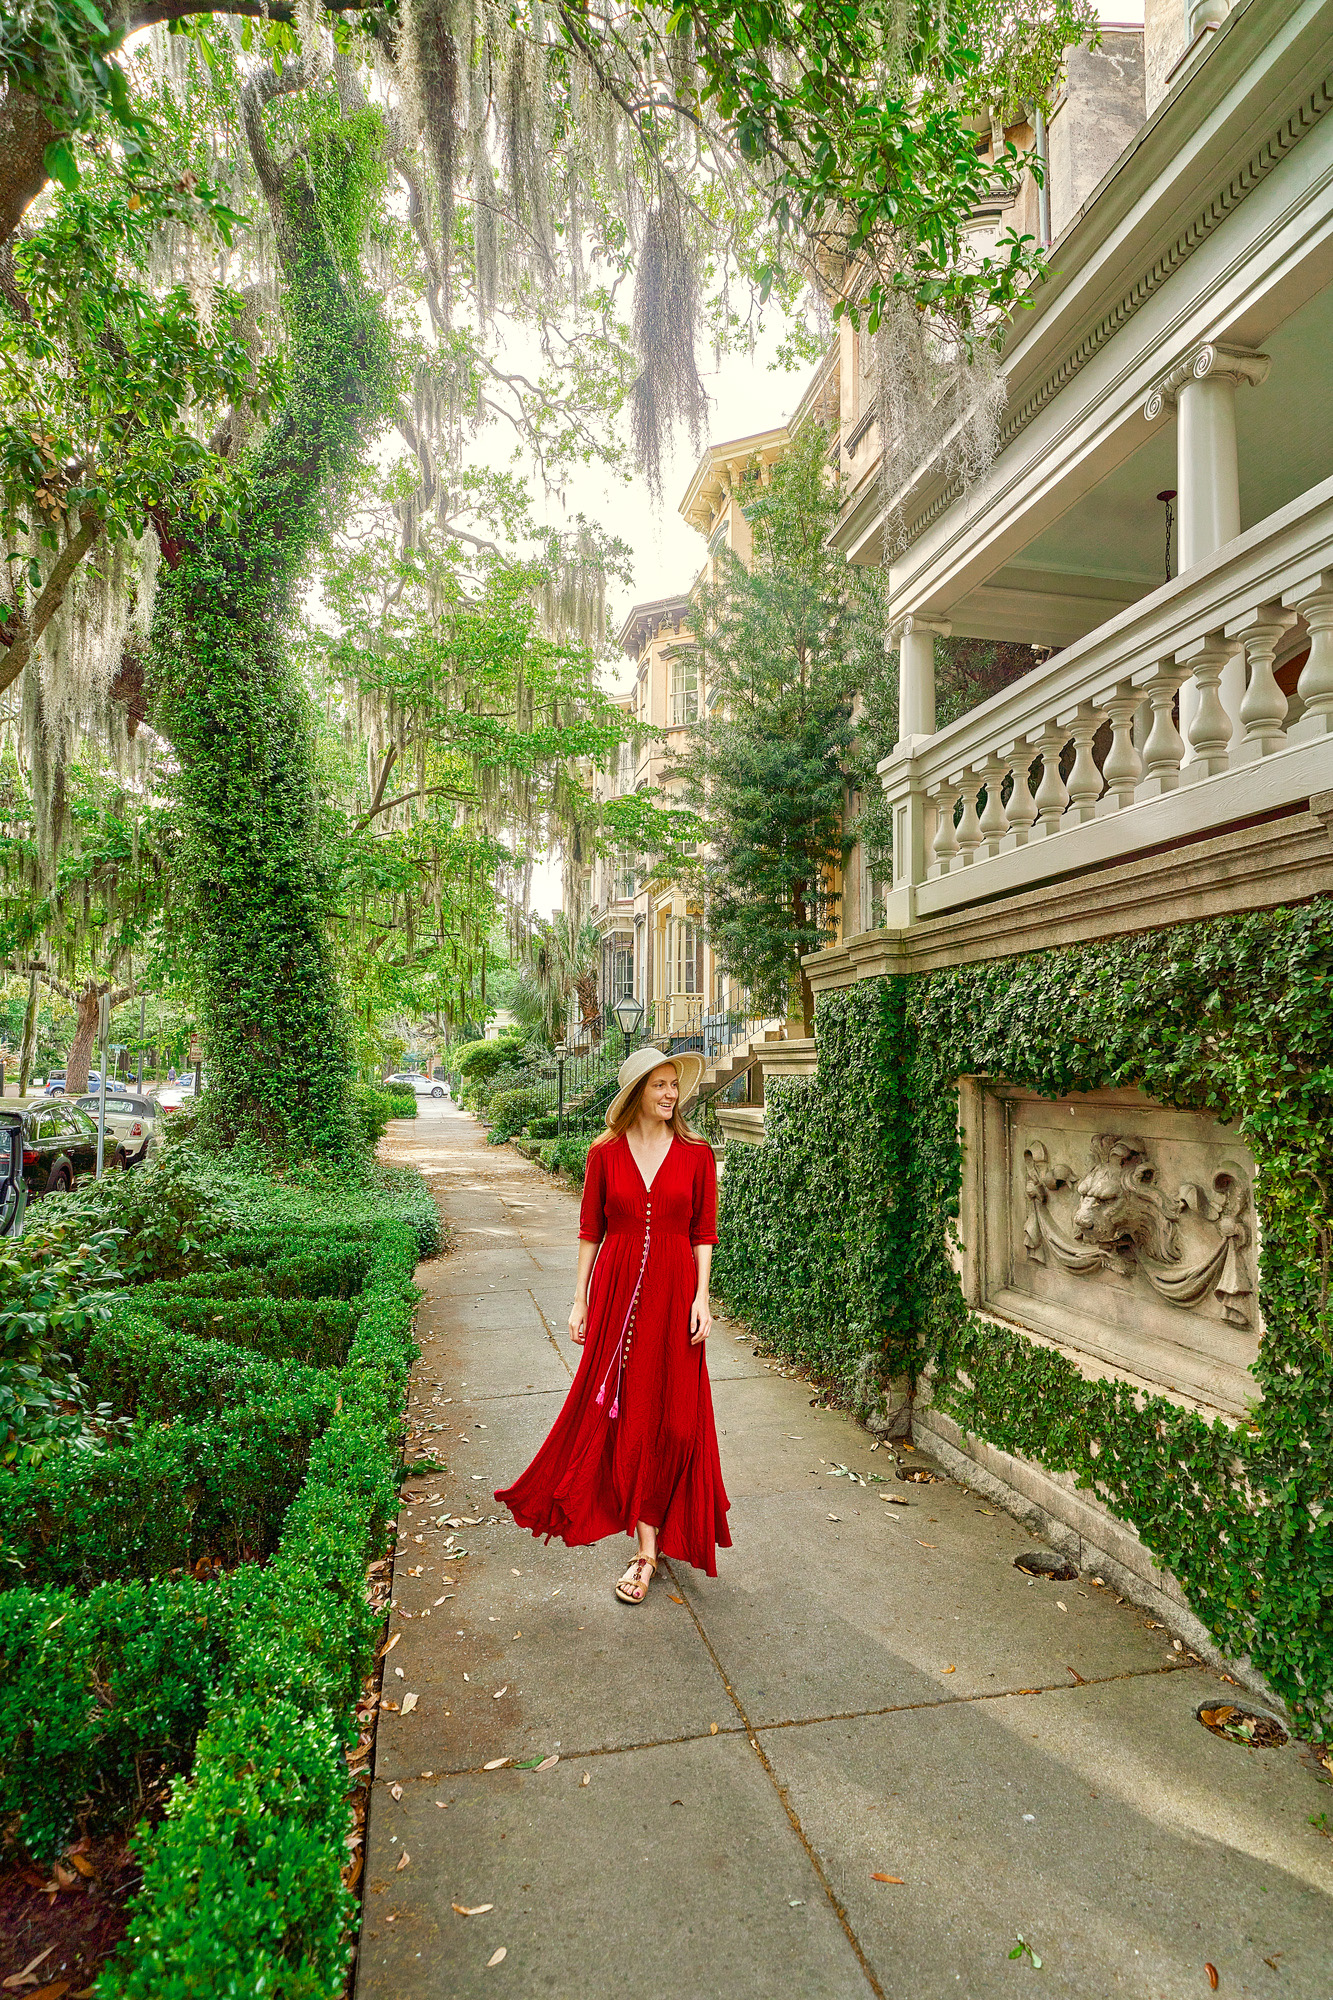 A woman in a red dress standing on the sidewalk of a beautiful street in Savannah. One side of the sidewalk is lined with historic homes covered in ivy and other greenery. The other side has trees and boxwood shrubs